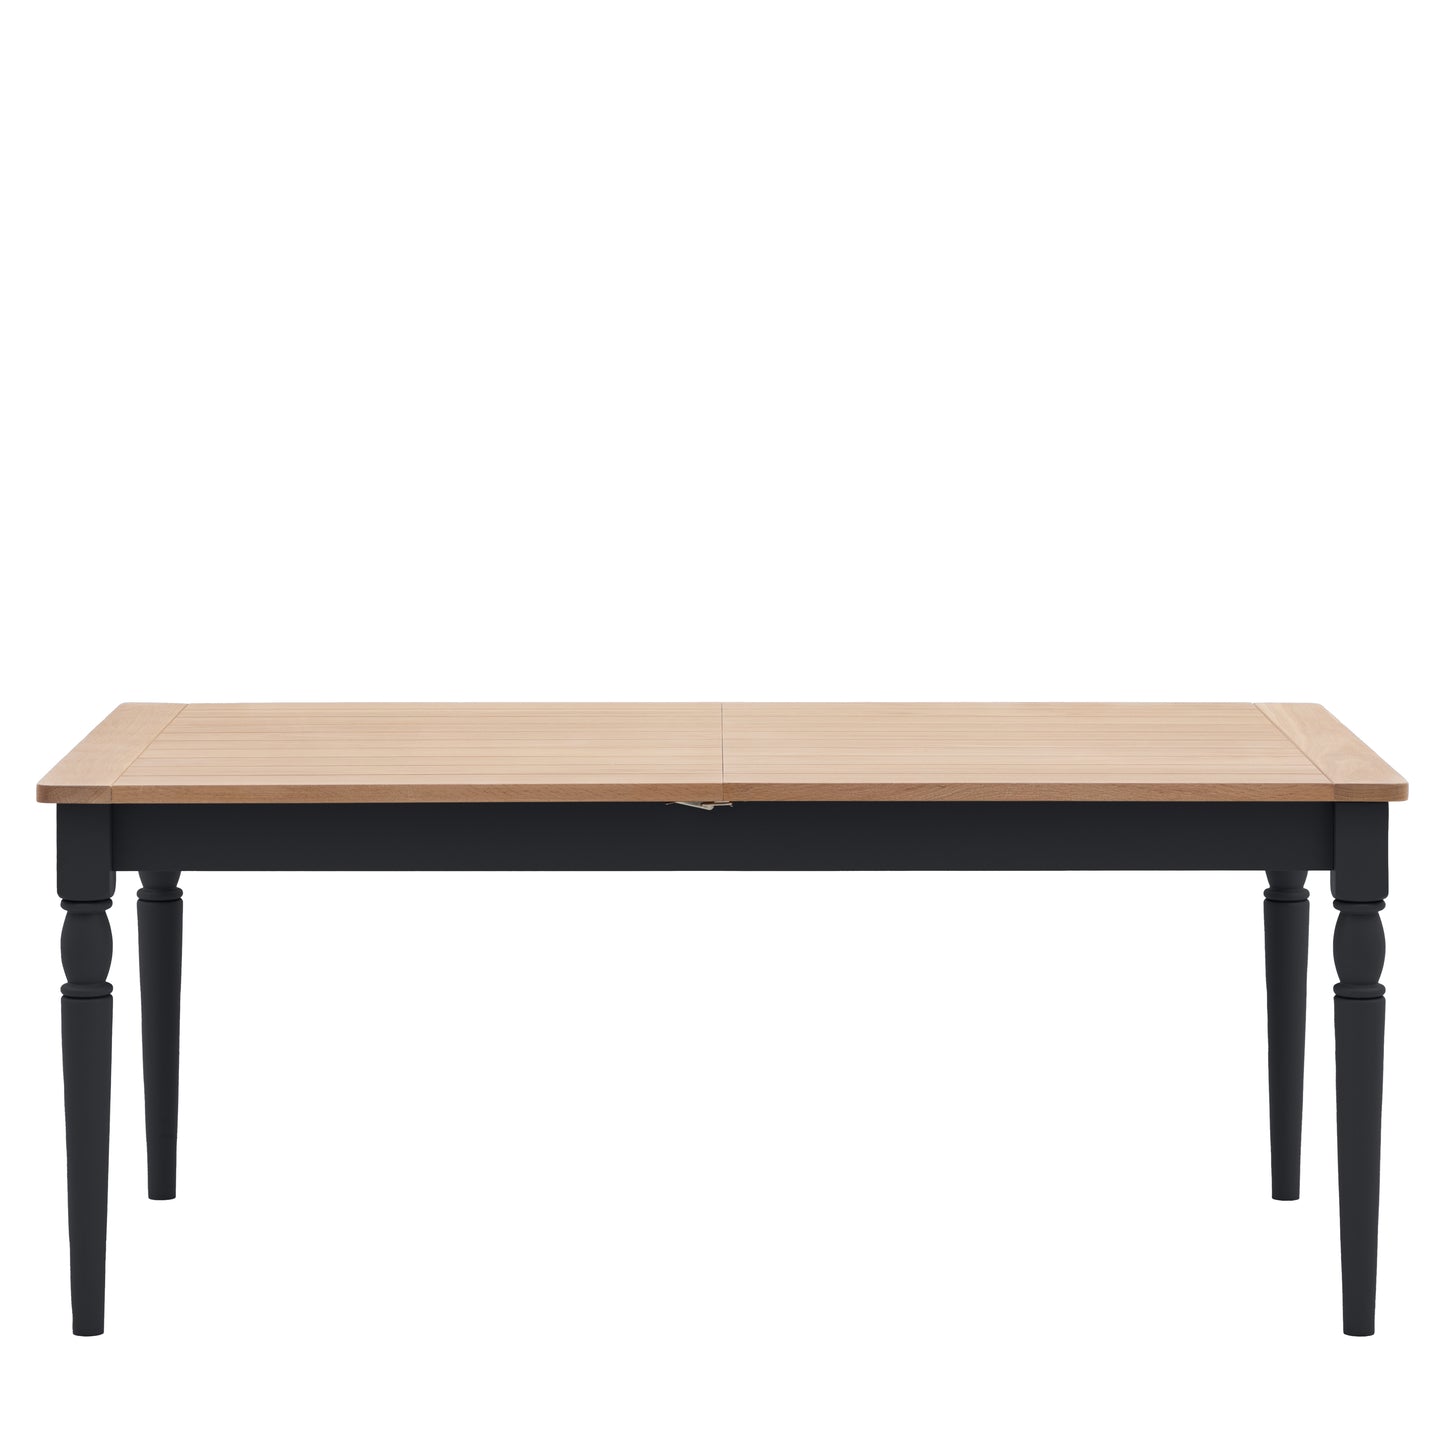 A rectangular meteor dining table with black legs and a black top for interior decor and home furniture.